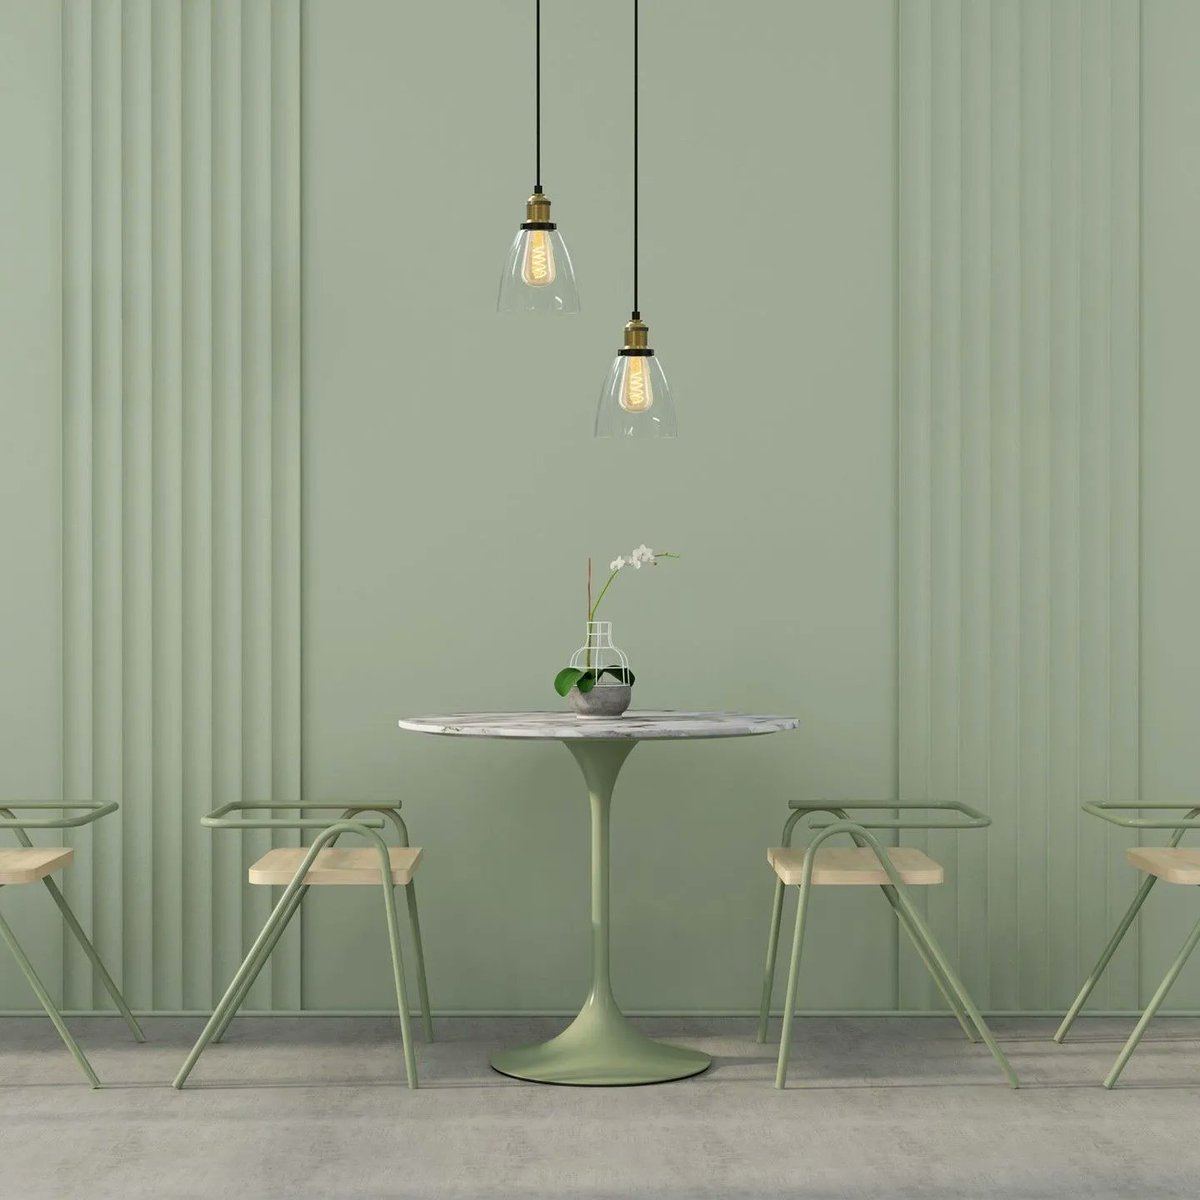 The HOXTON-2 is a luxurious fitting has a unique knurling detail suitable for any upscale interiors, kitchens, dining areas and more. We love it in this minty café 😍🌿
An InteriorDesign InteriorInspo #Indonesia #article #hospitalityfurniture  
Original: Orlight_SP